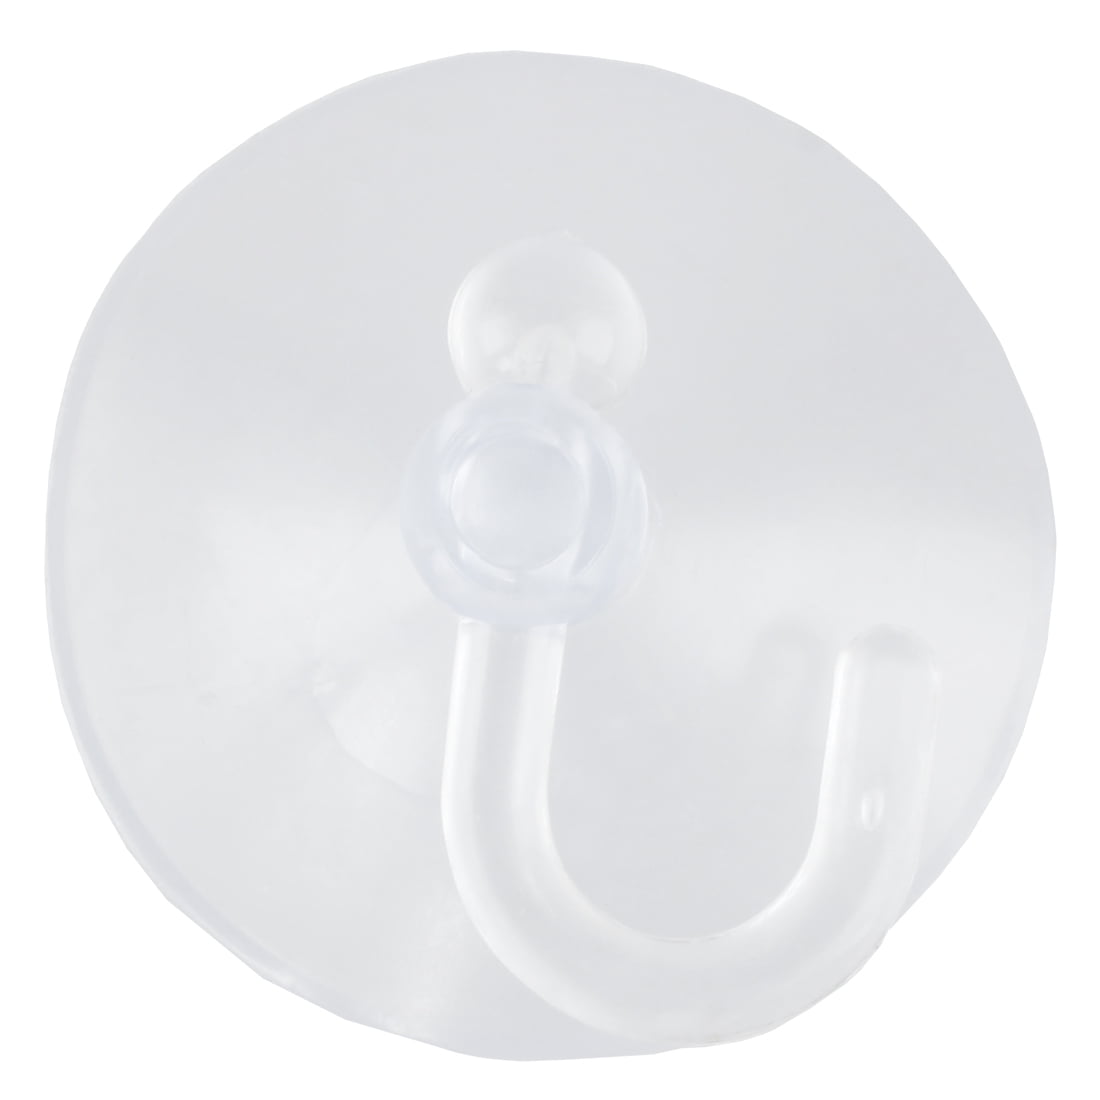 5pcs Bathroom Kitchen Glass Clear Suction Cup Hook Wall HangersYJHC 